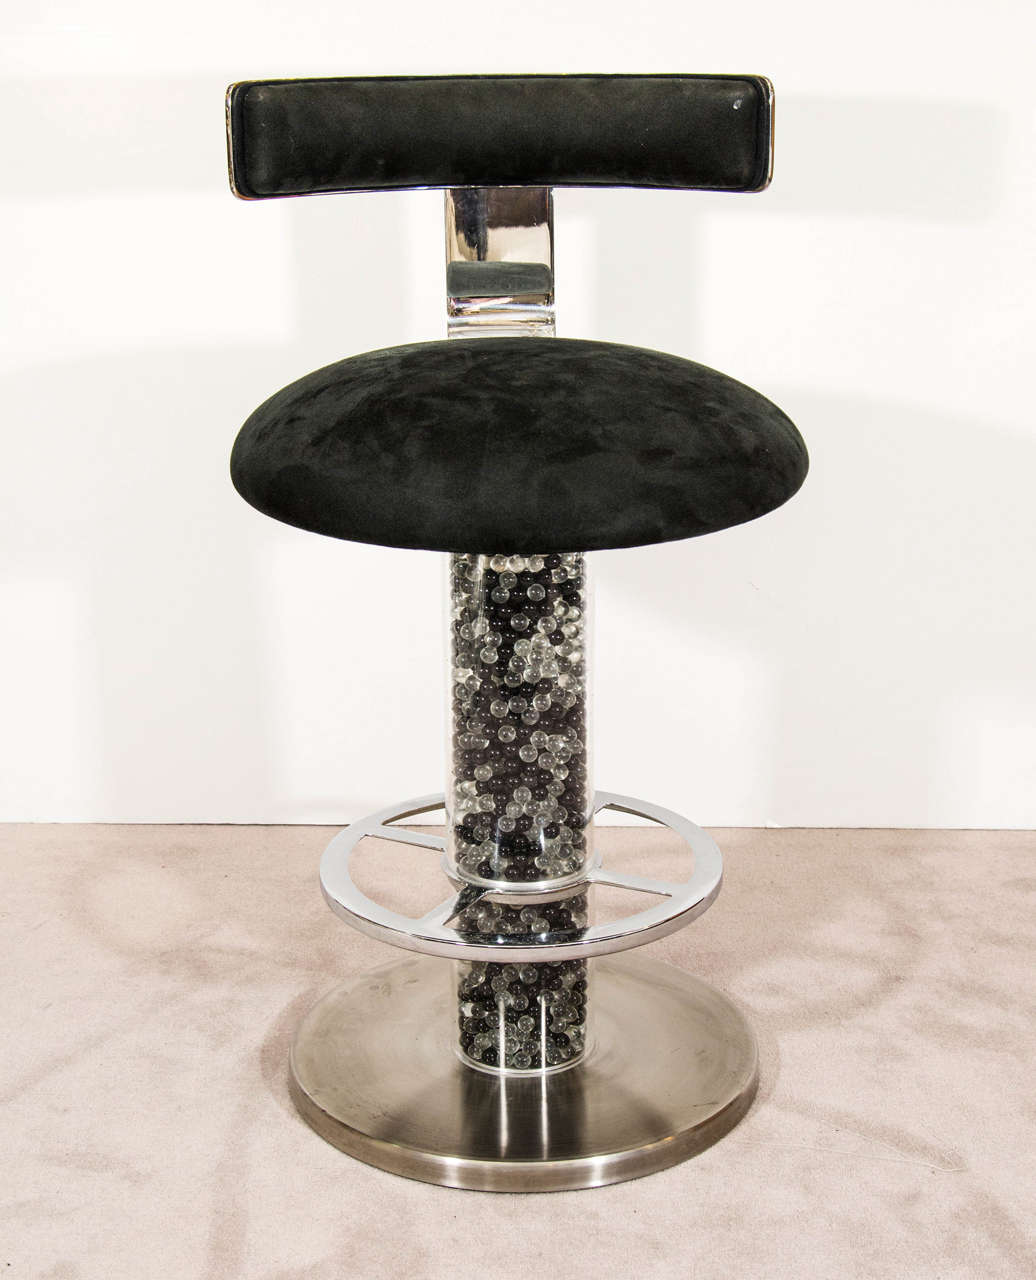 A vintage set of three black velvet swivel bar stools by Designs for Leisure circa 1980. Made of nickel with a column filled with black and white marbles. Good vintage condition with age appropriate wear. Some light scratches to one base.